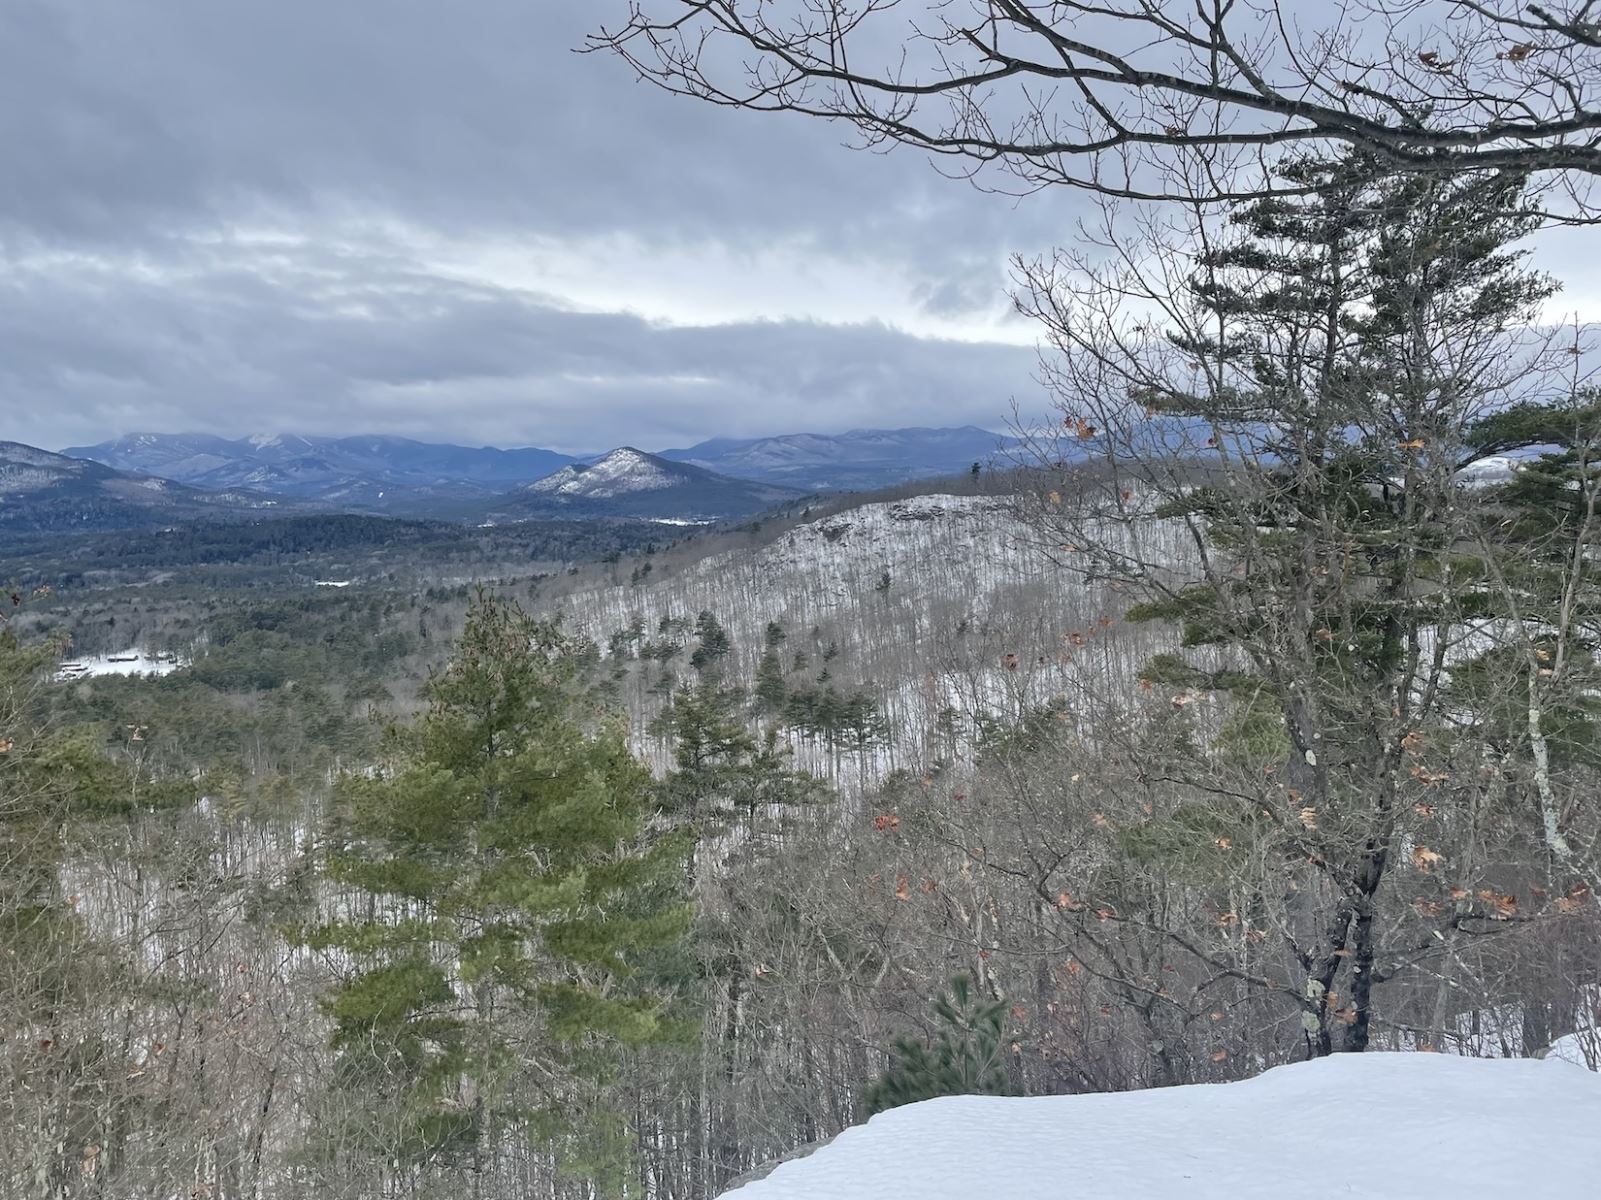 Champlain Area Trails Hosts Winter Day Celebration at Twin Valleys Outdoor Education Center